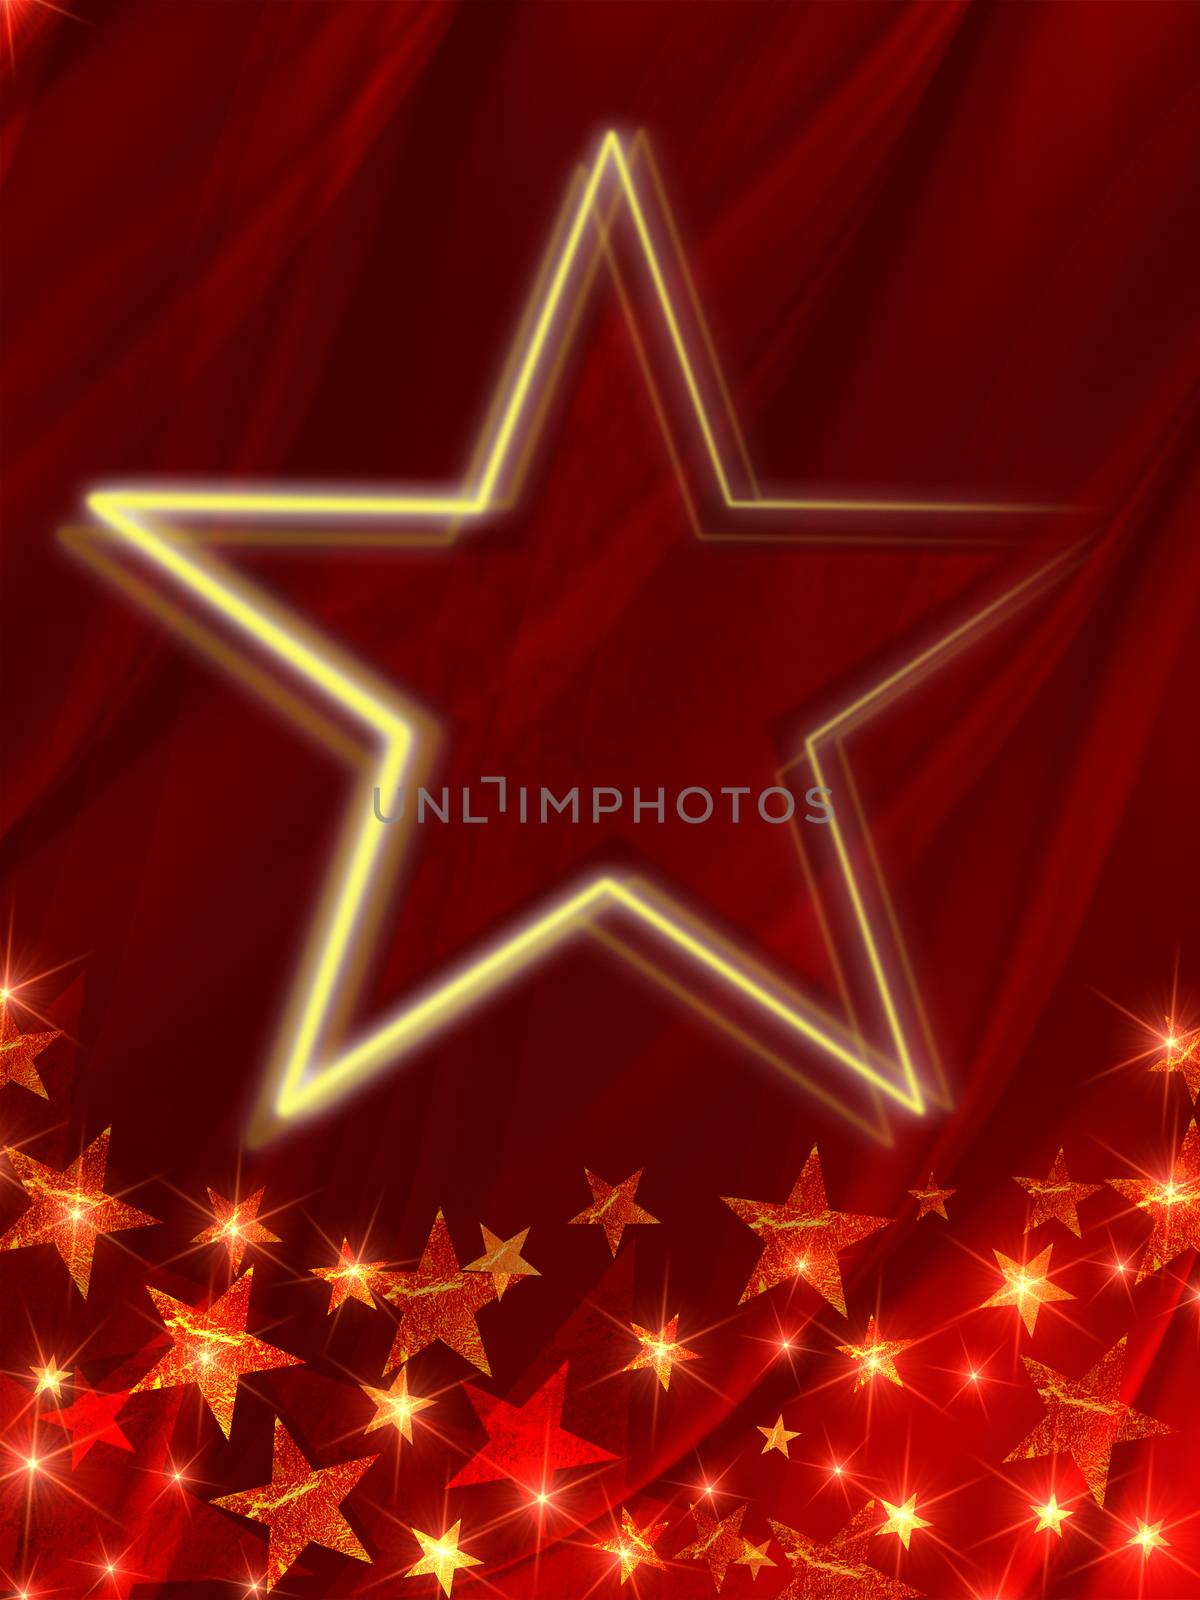 star over red background by marinini